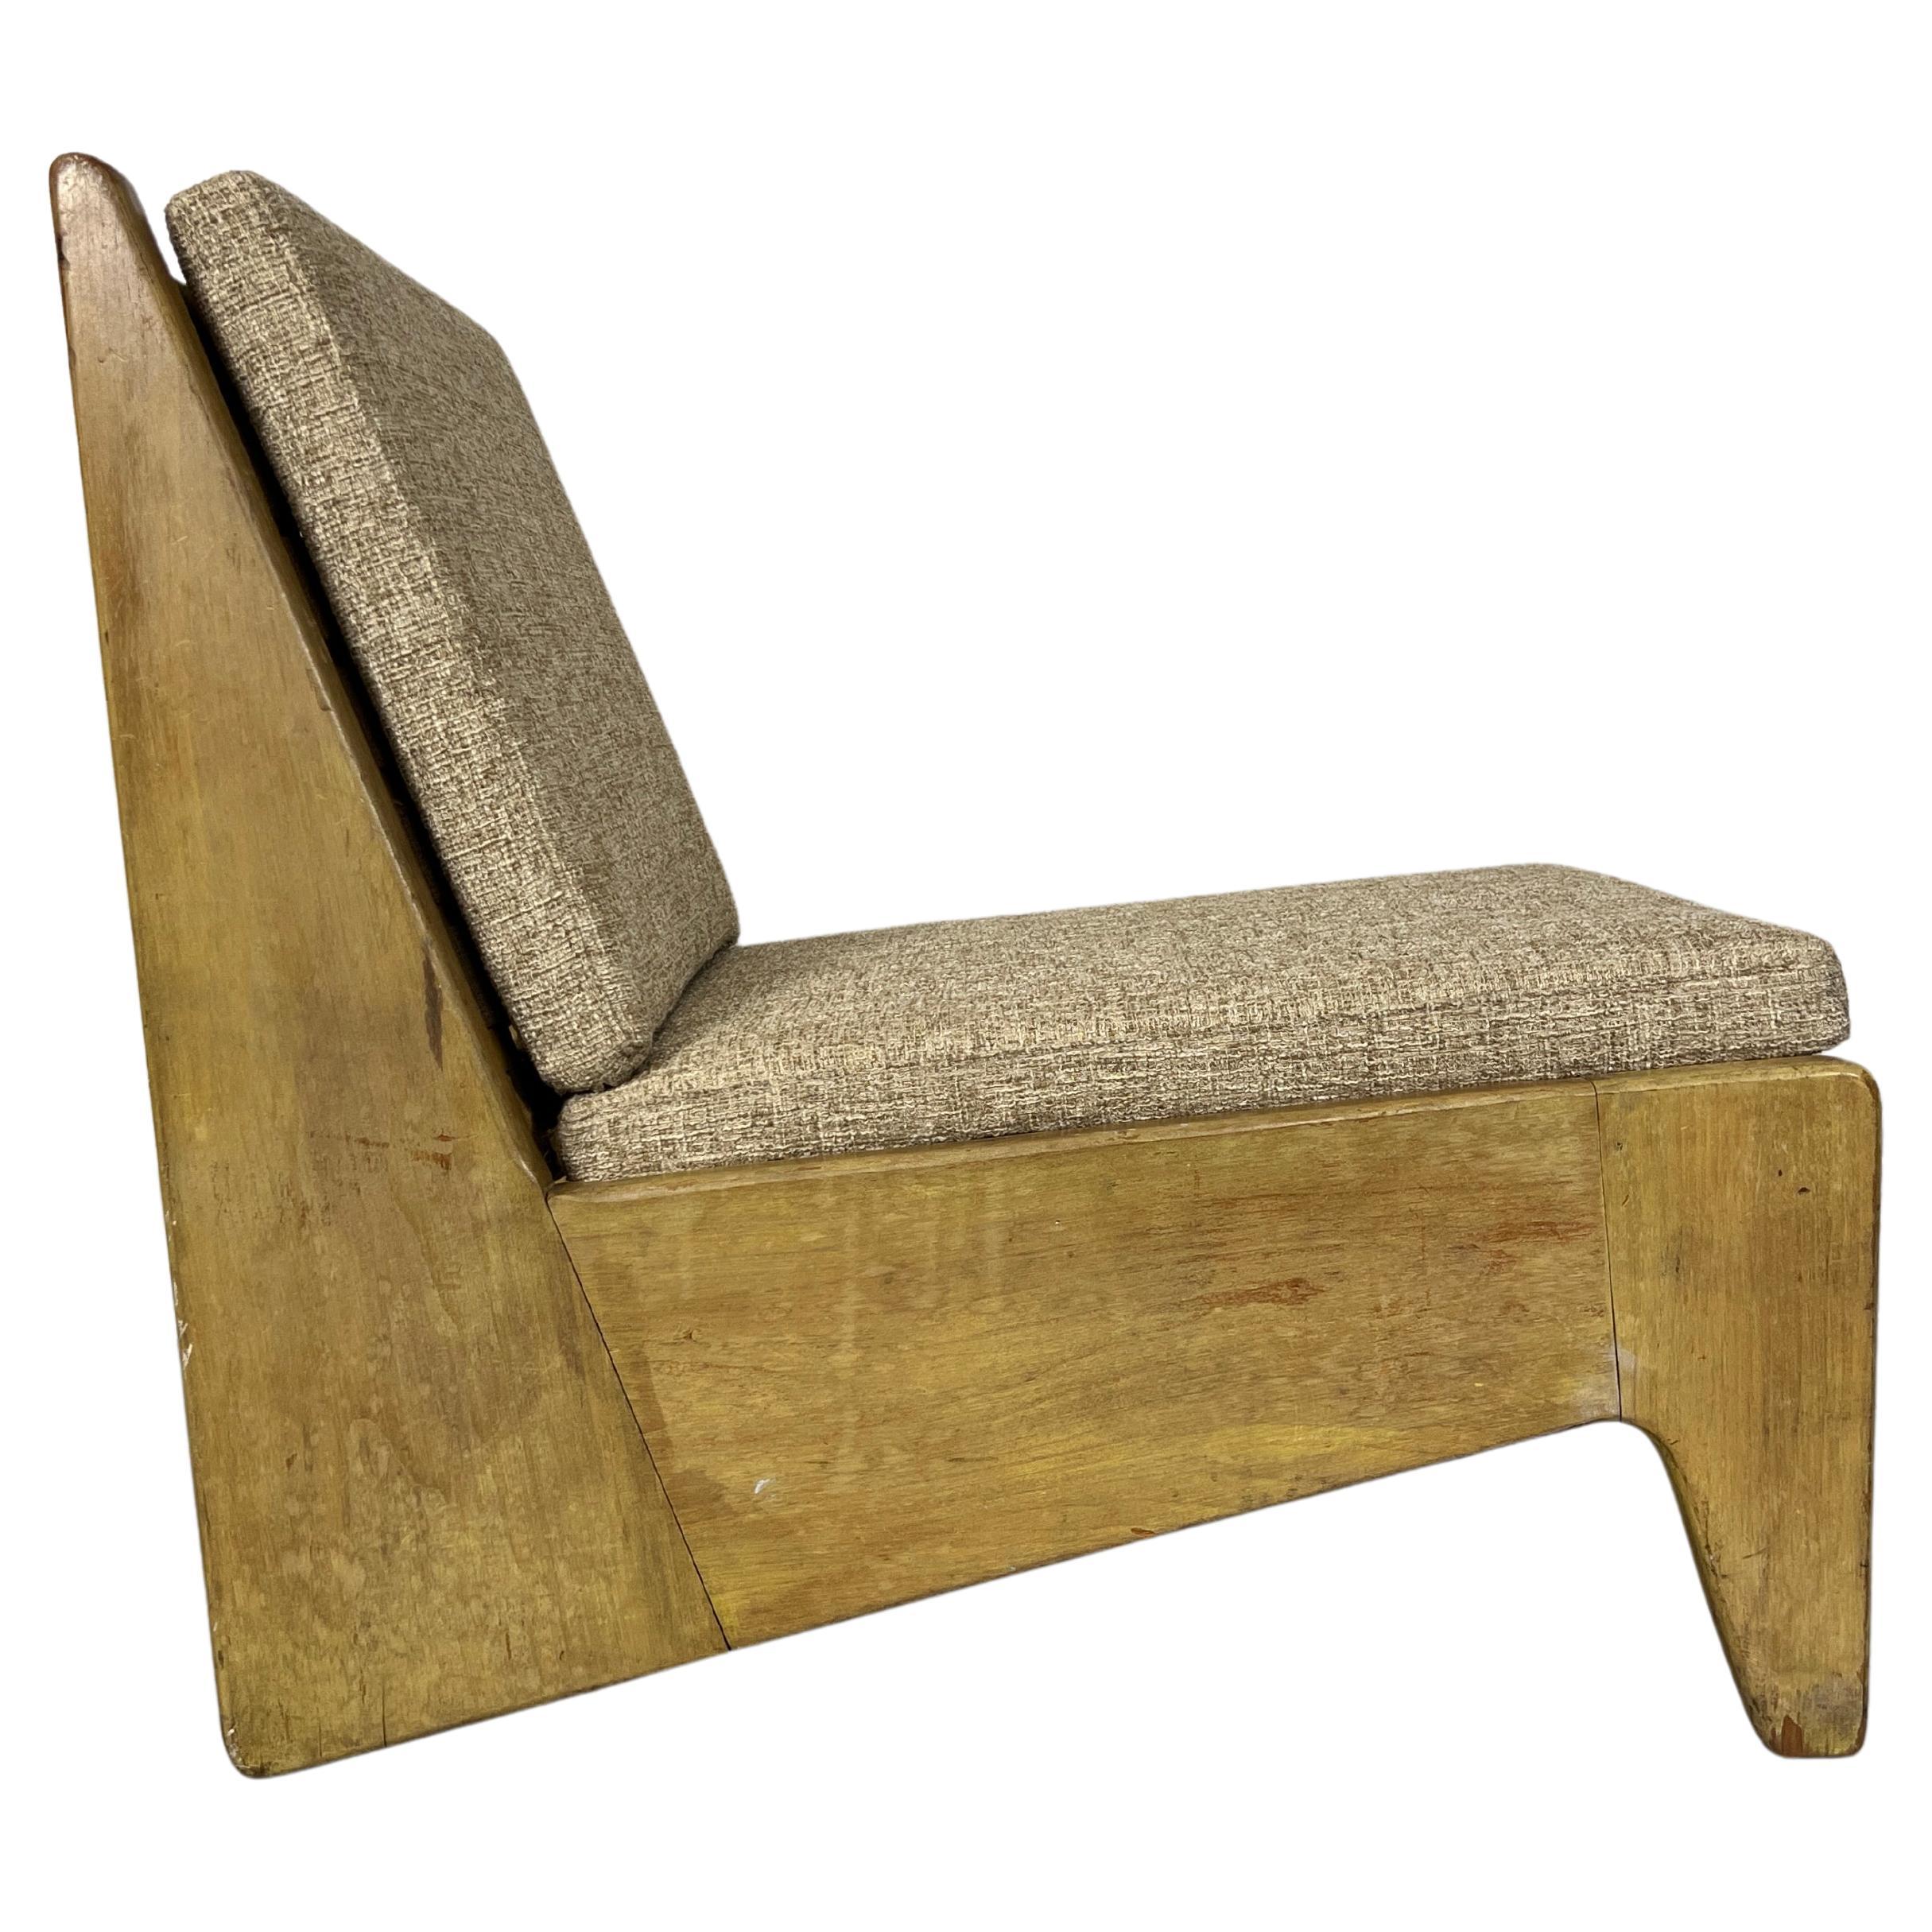 Architectural Modernist Lounge Chair